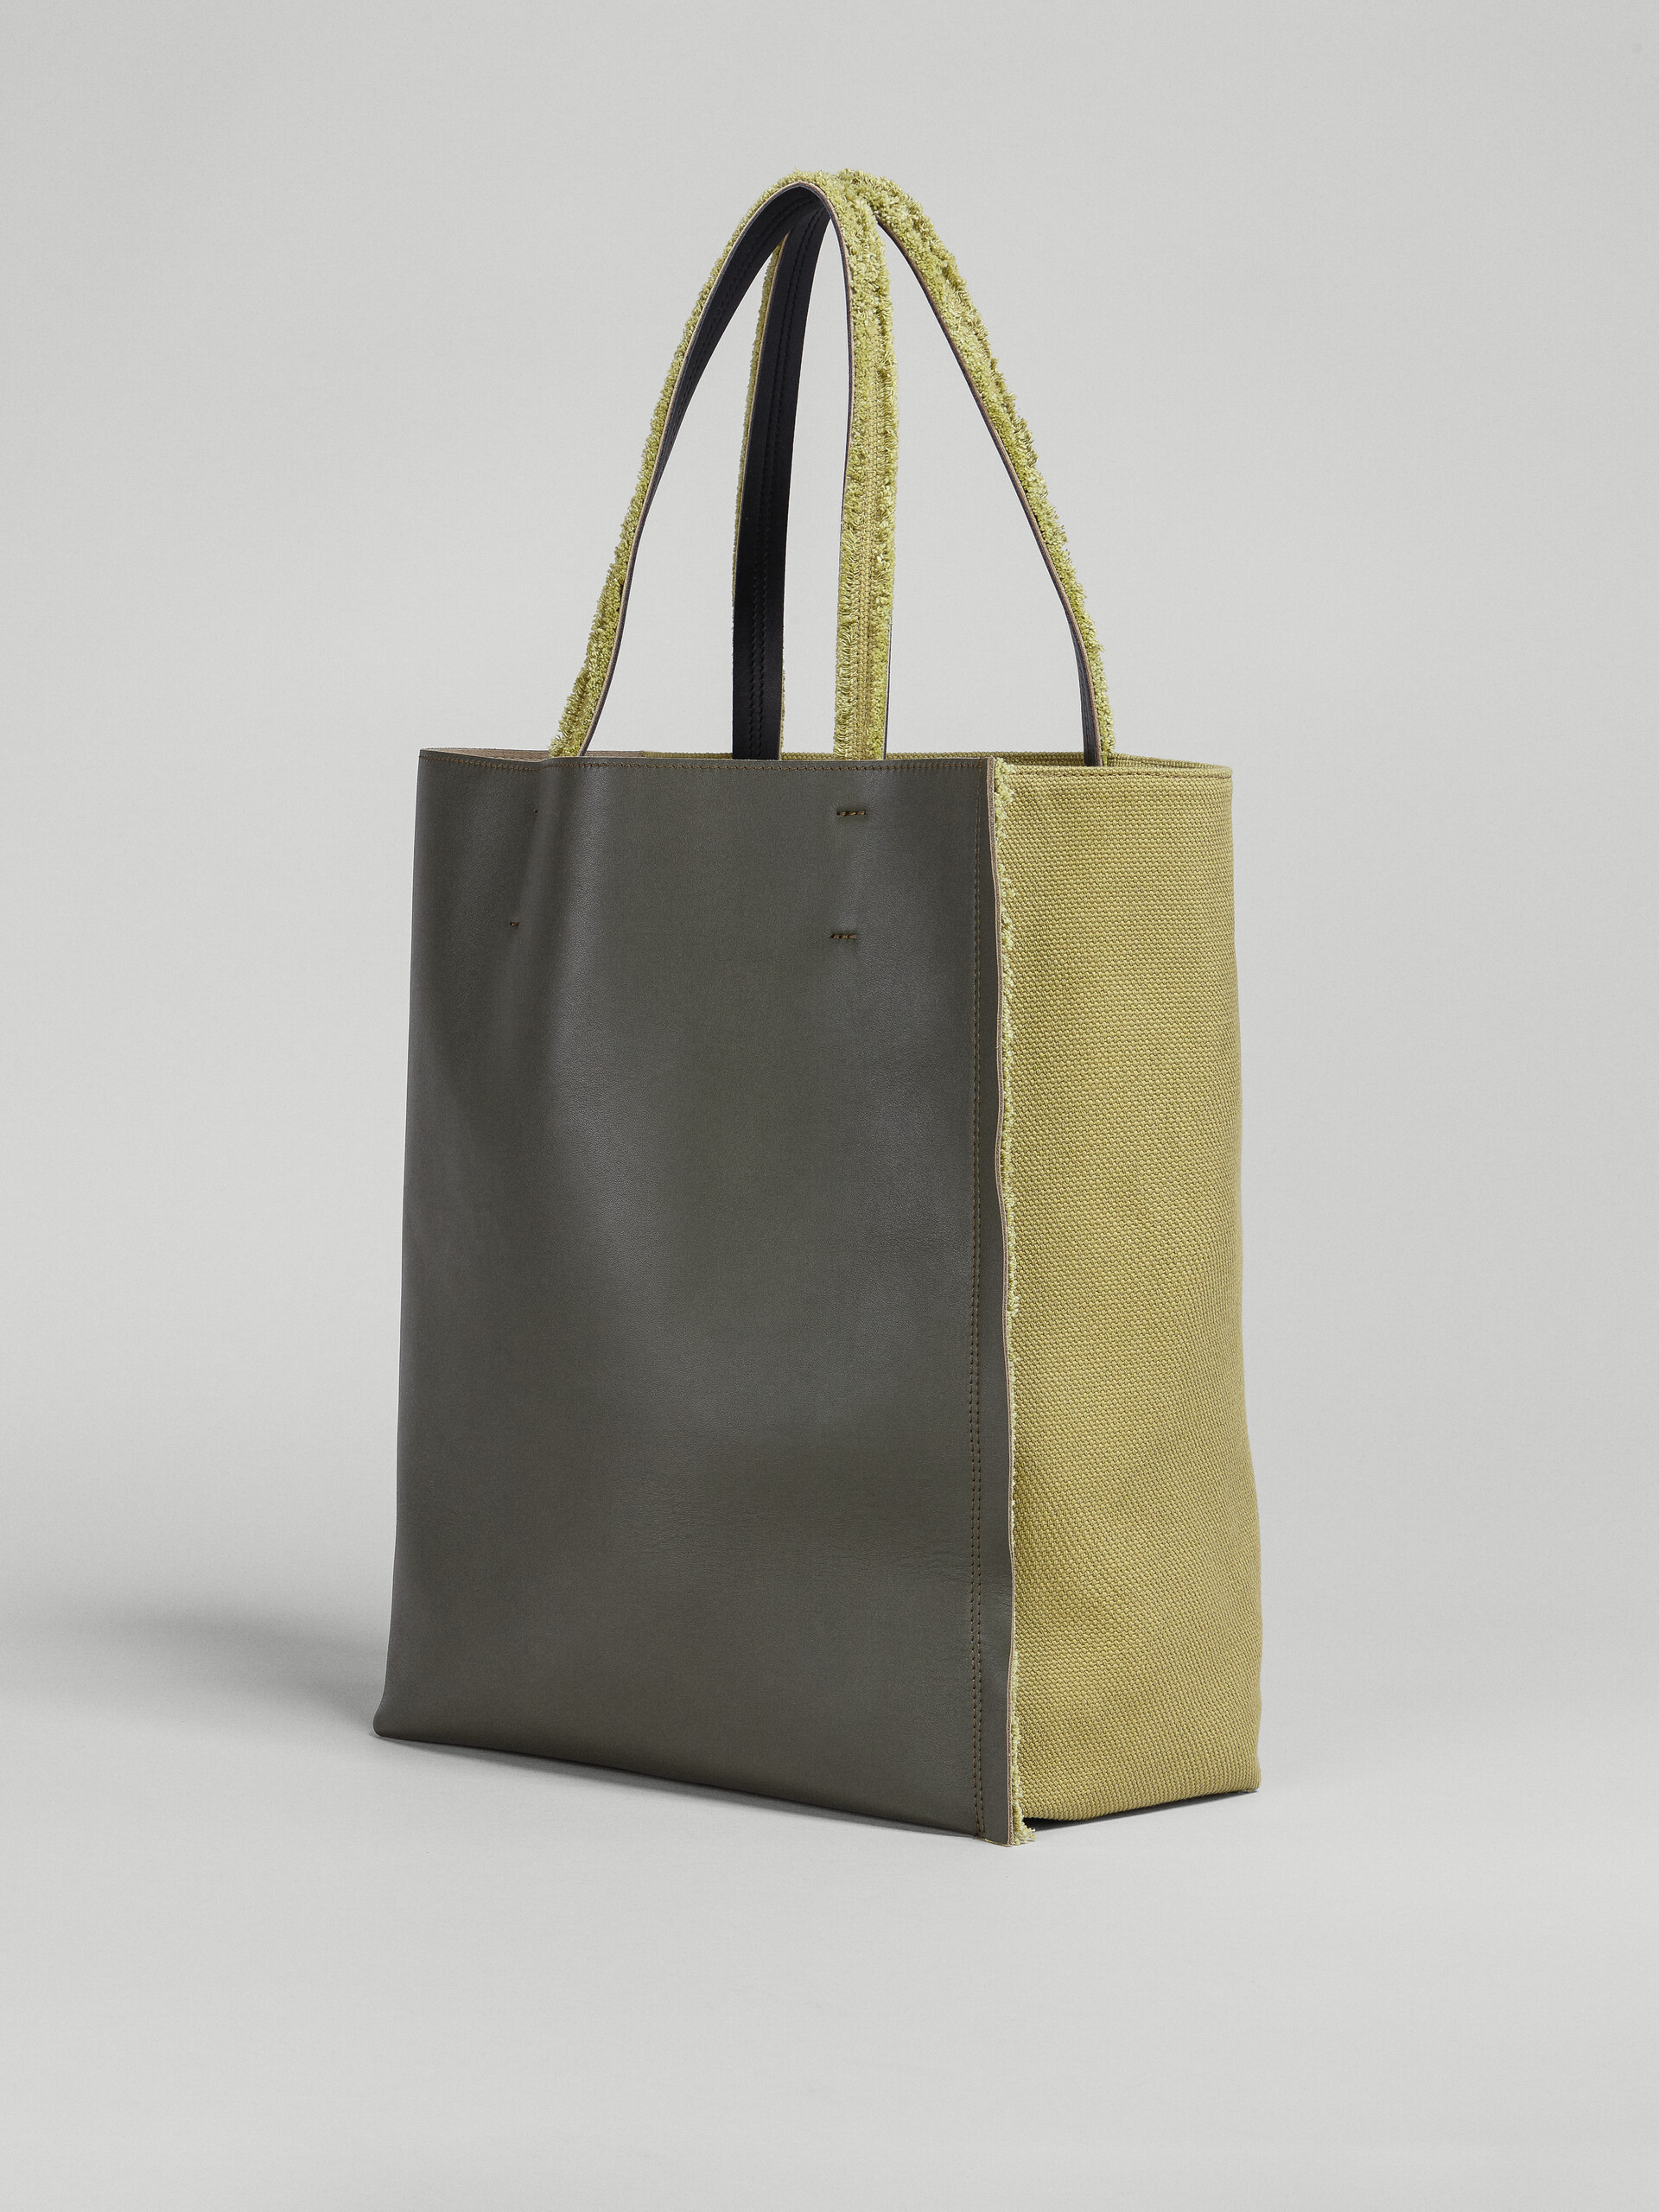 MUSEO SOFT large bag in green leather and canvas - Shopping Bags - Image 3